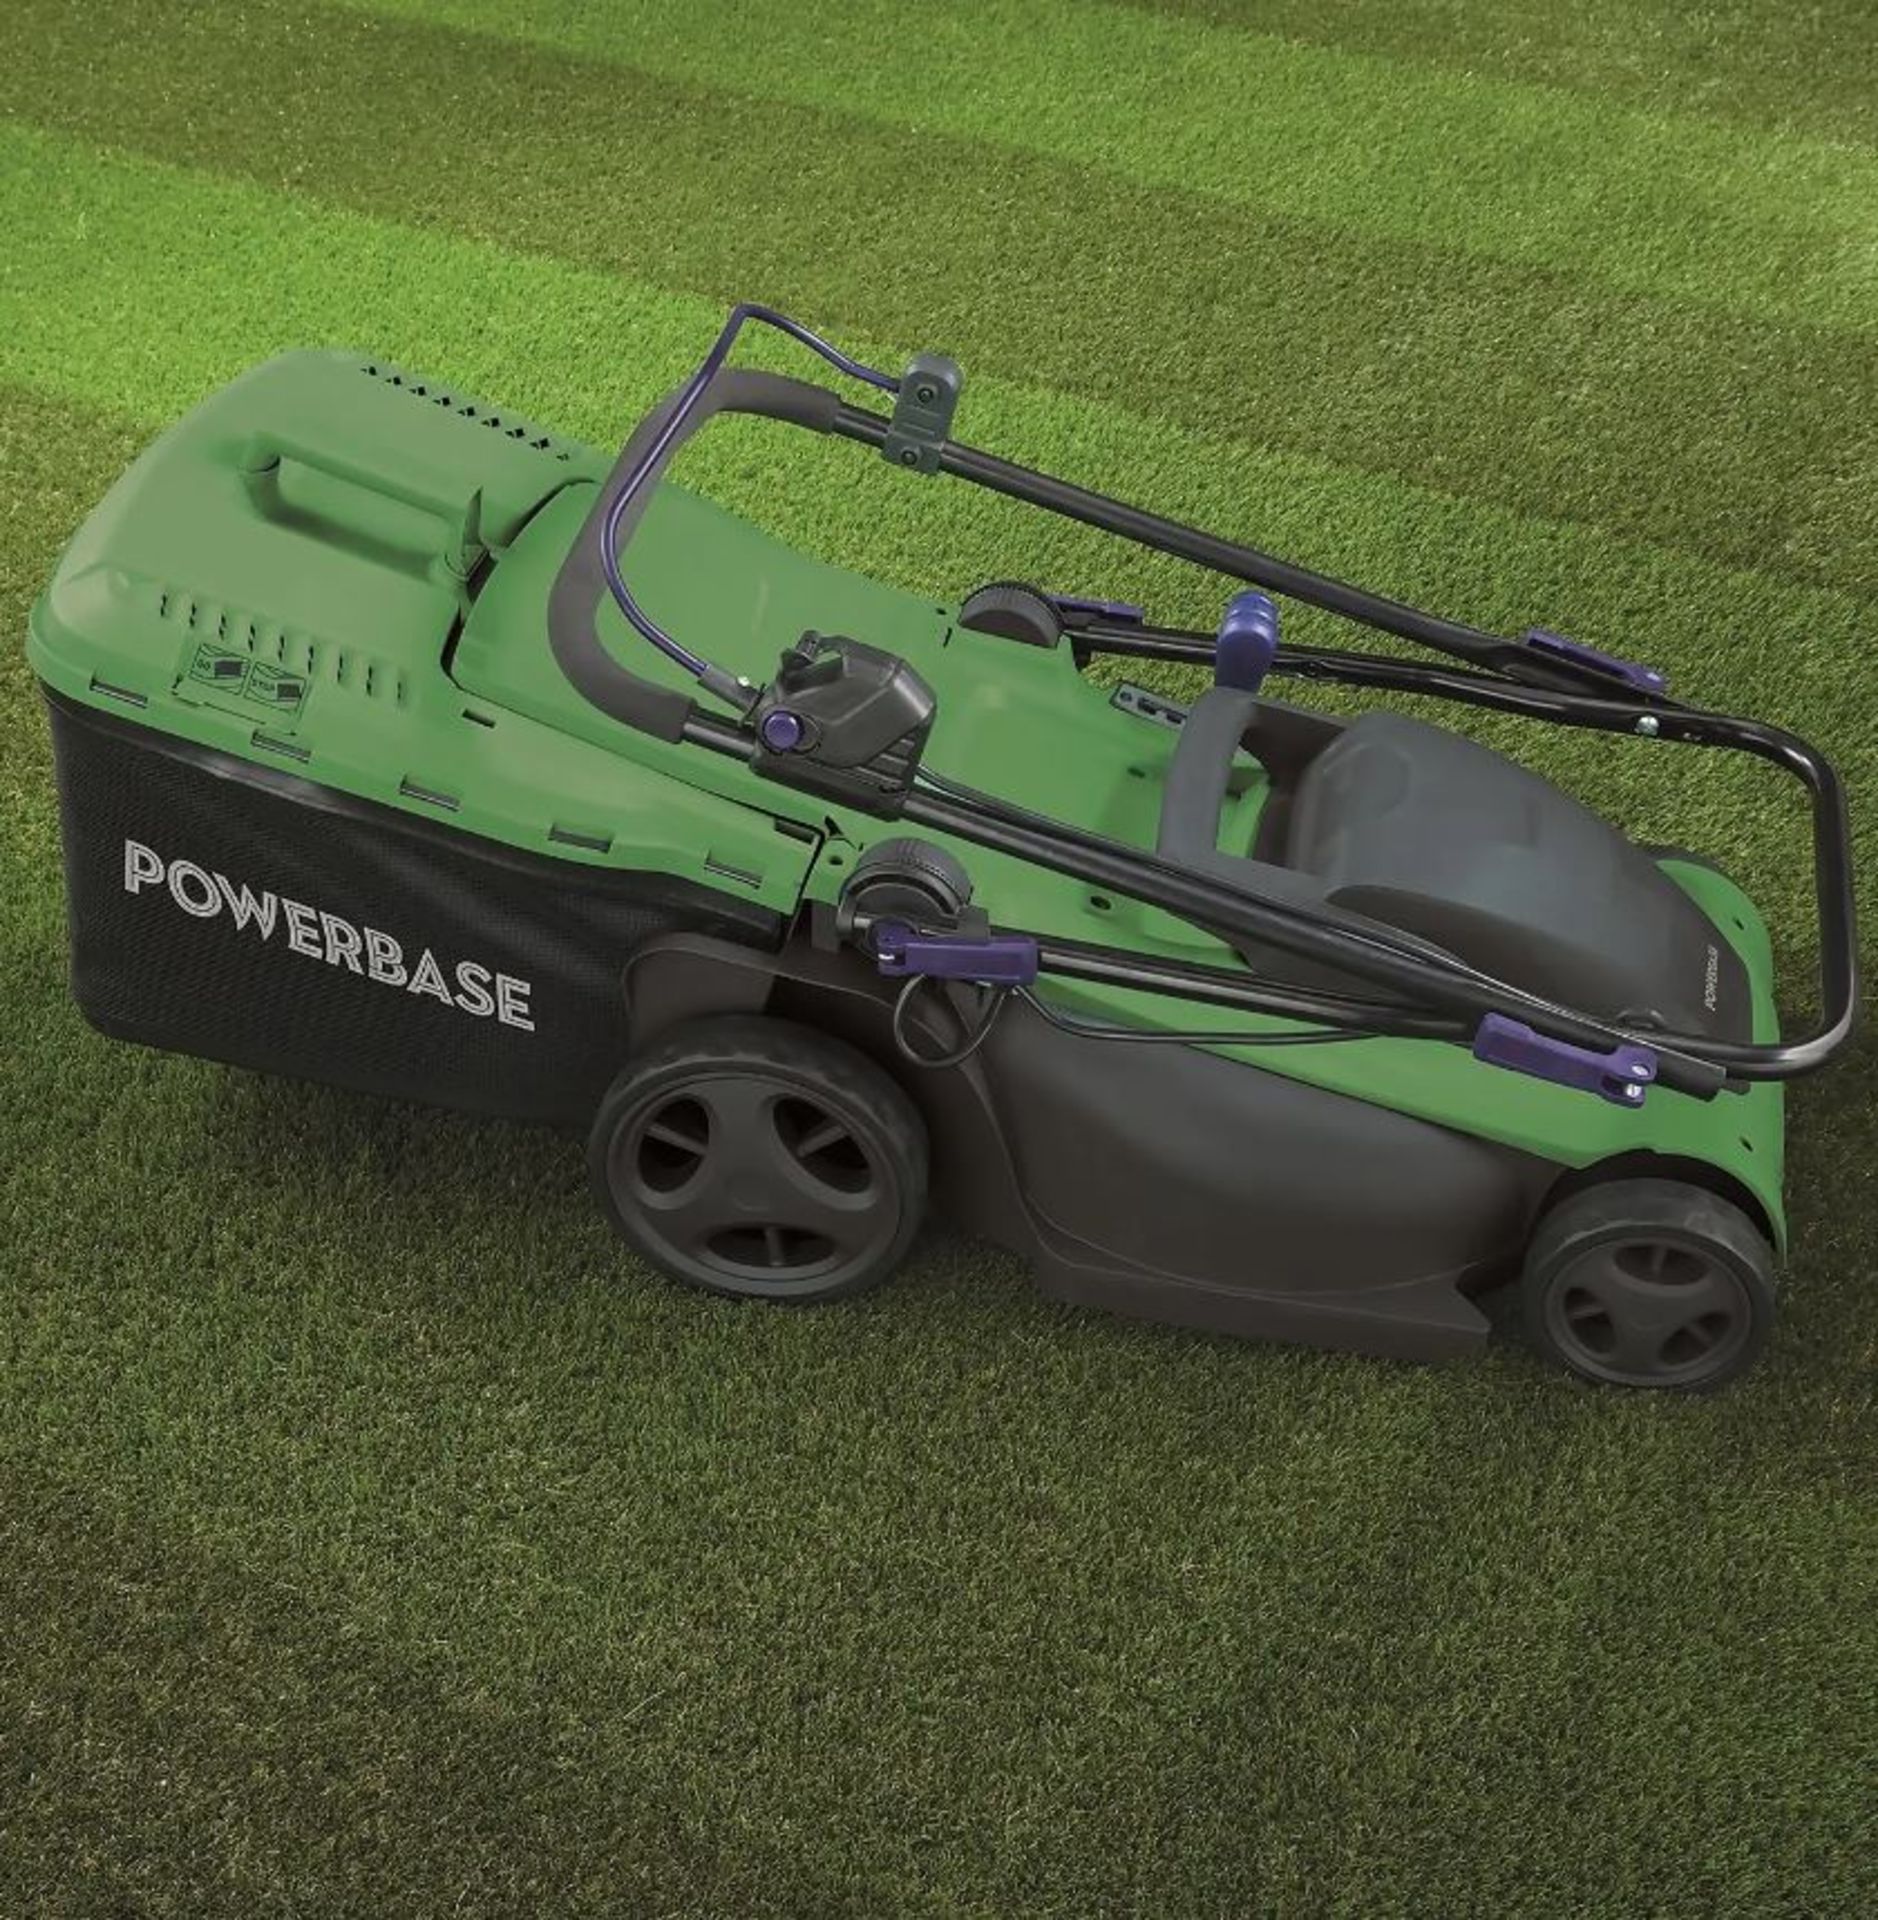 (R13C) 1x Powerbase 41cm 1800W Electric Rotary Lawn Mower RRP £119. - Image 2 of 4